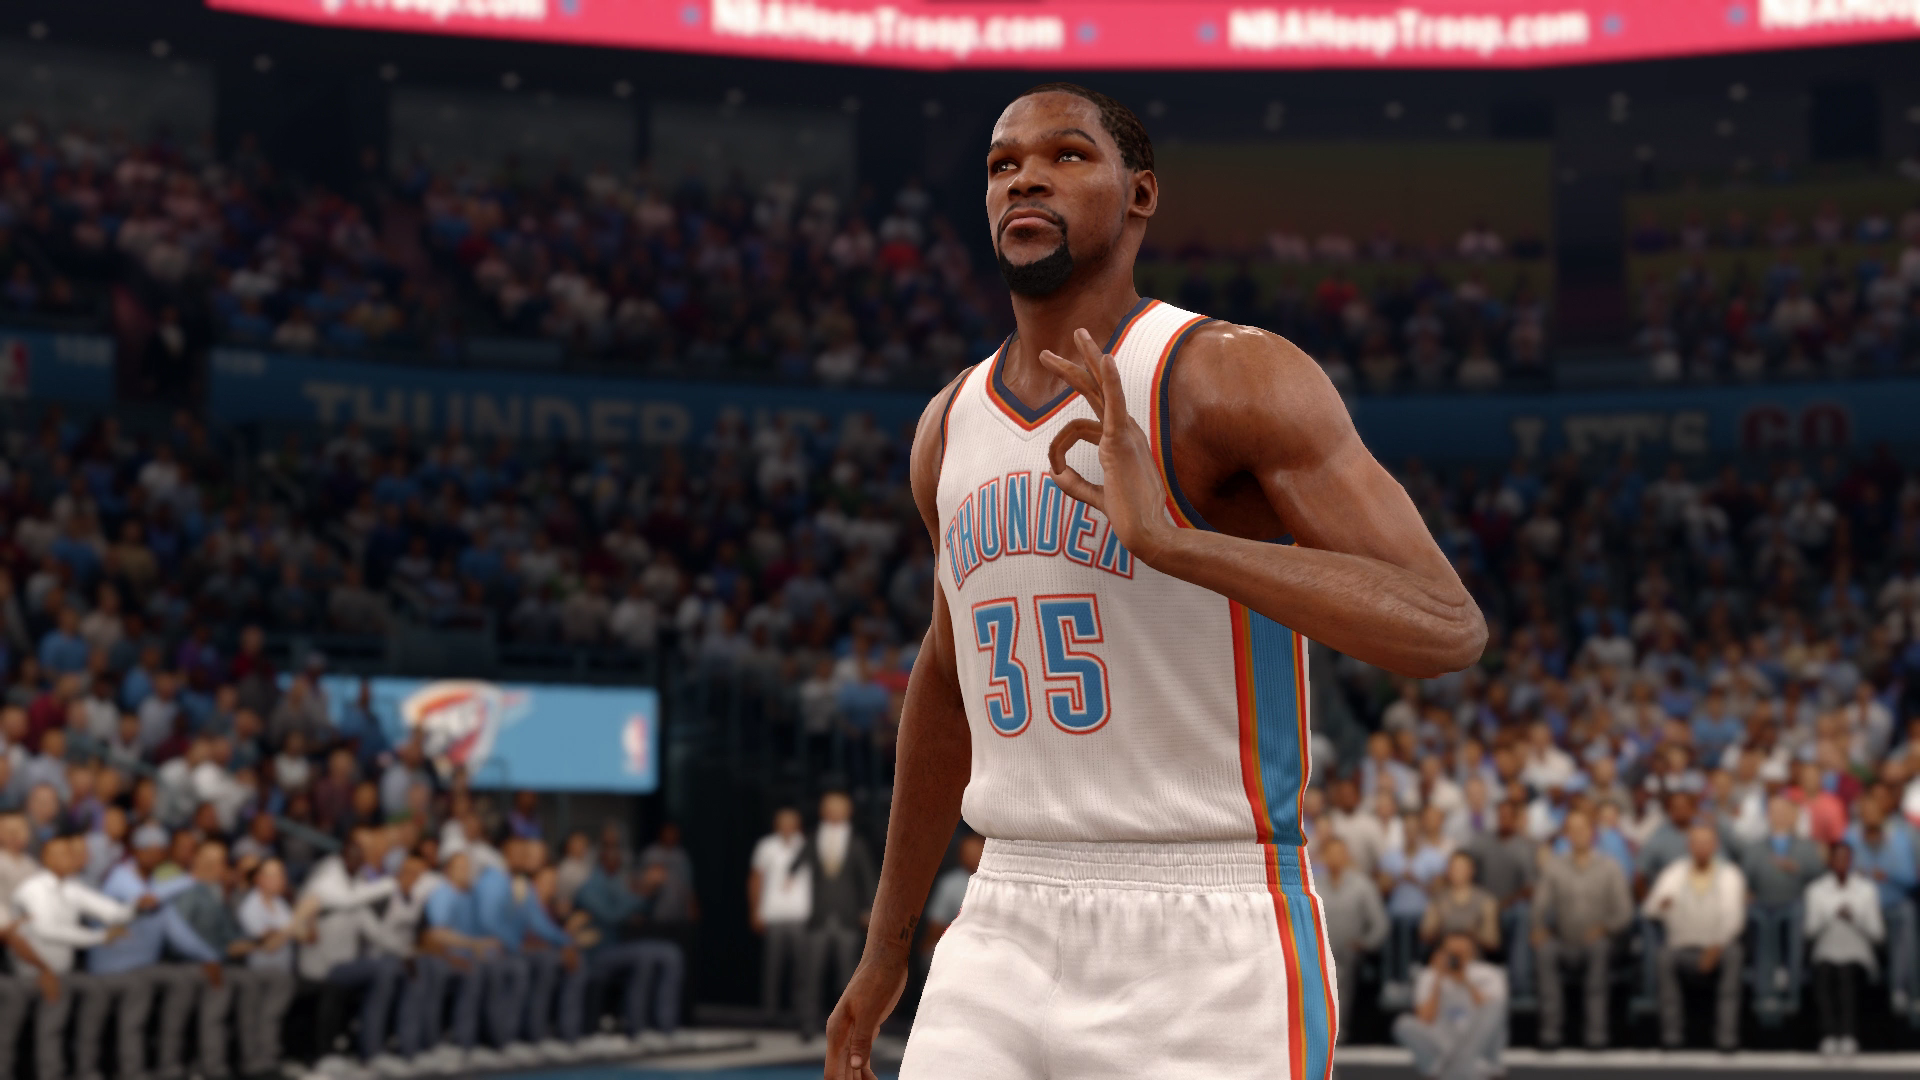 Official NBA Live 16 Screenshot Thread - Page 6 - Operation Sports Forums